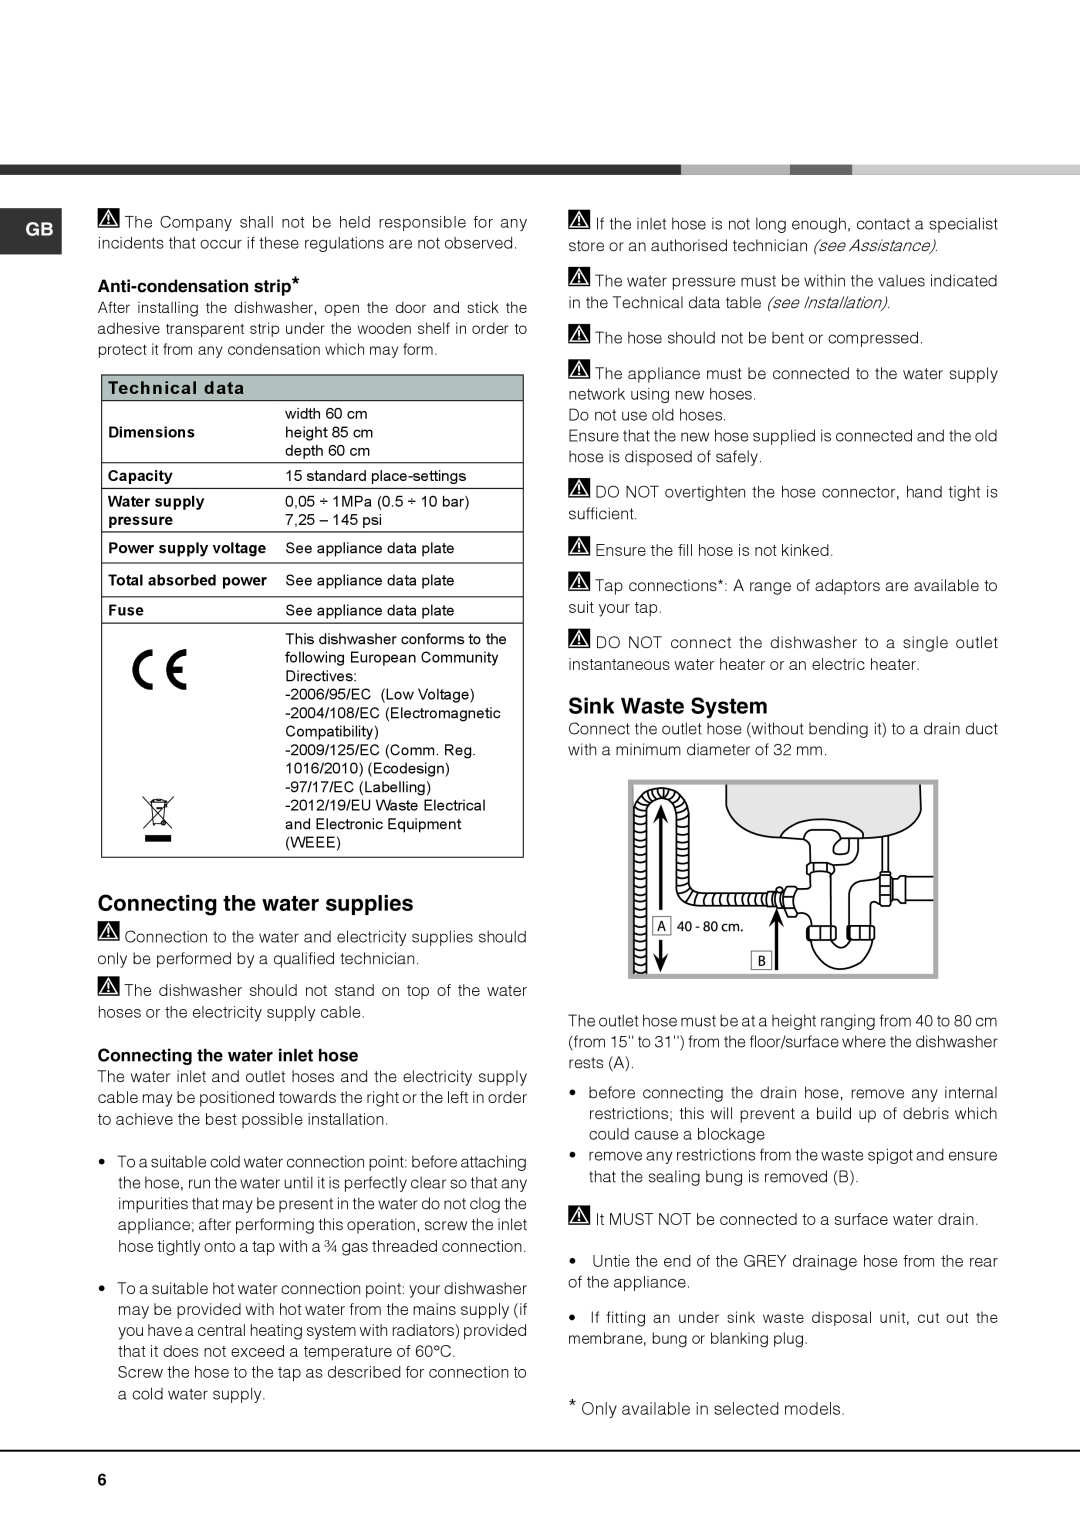 Hotpoint 51110 manual Connecting the water supplies, Sink Waste System, Anti-condensation strip, Technical data 